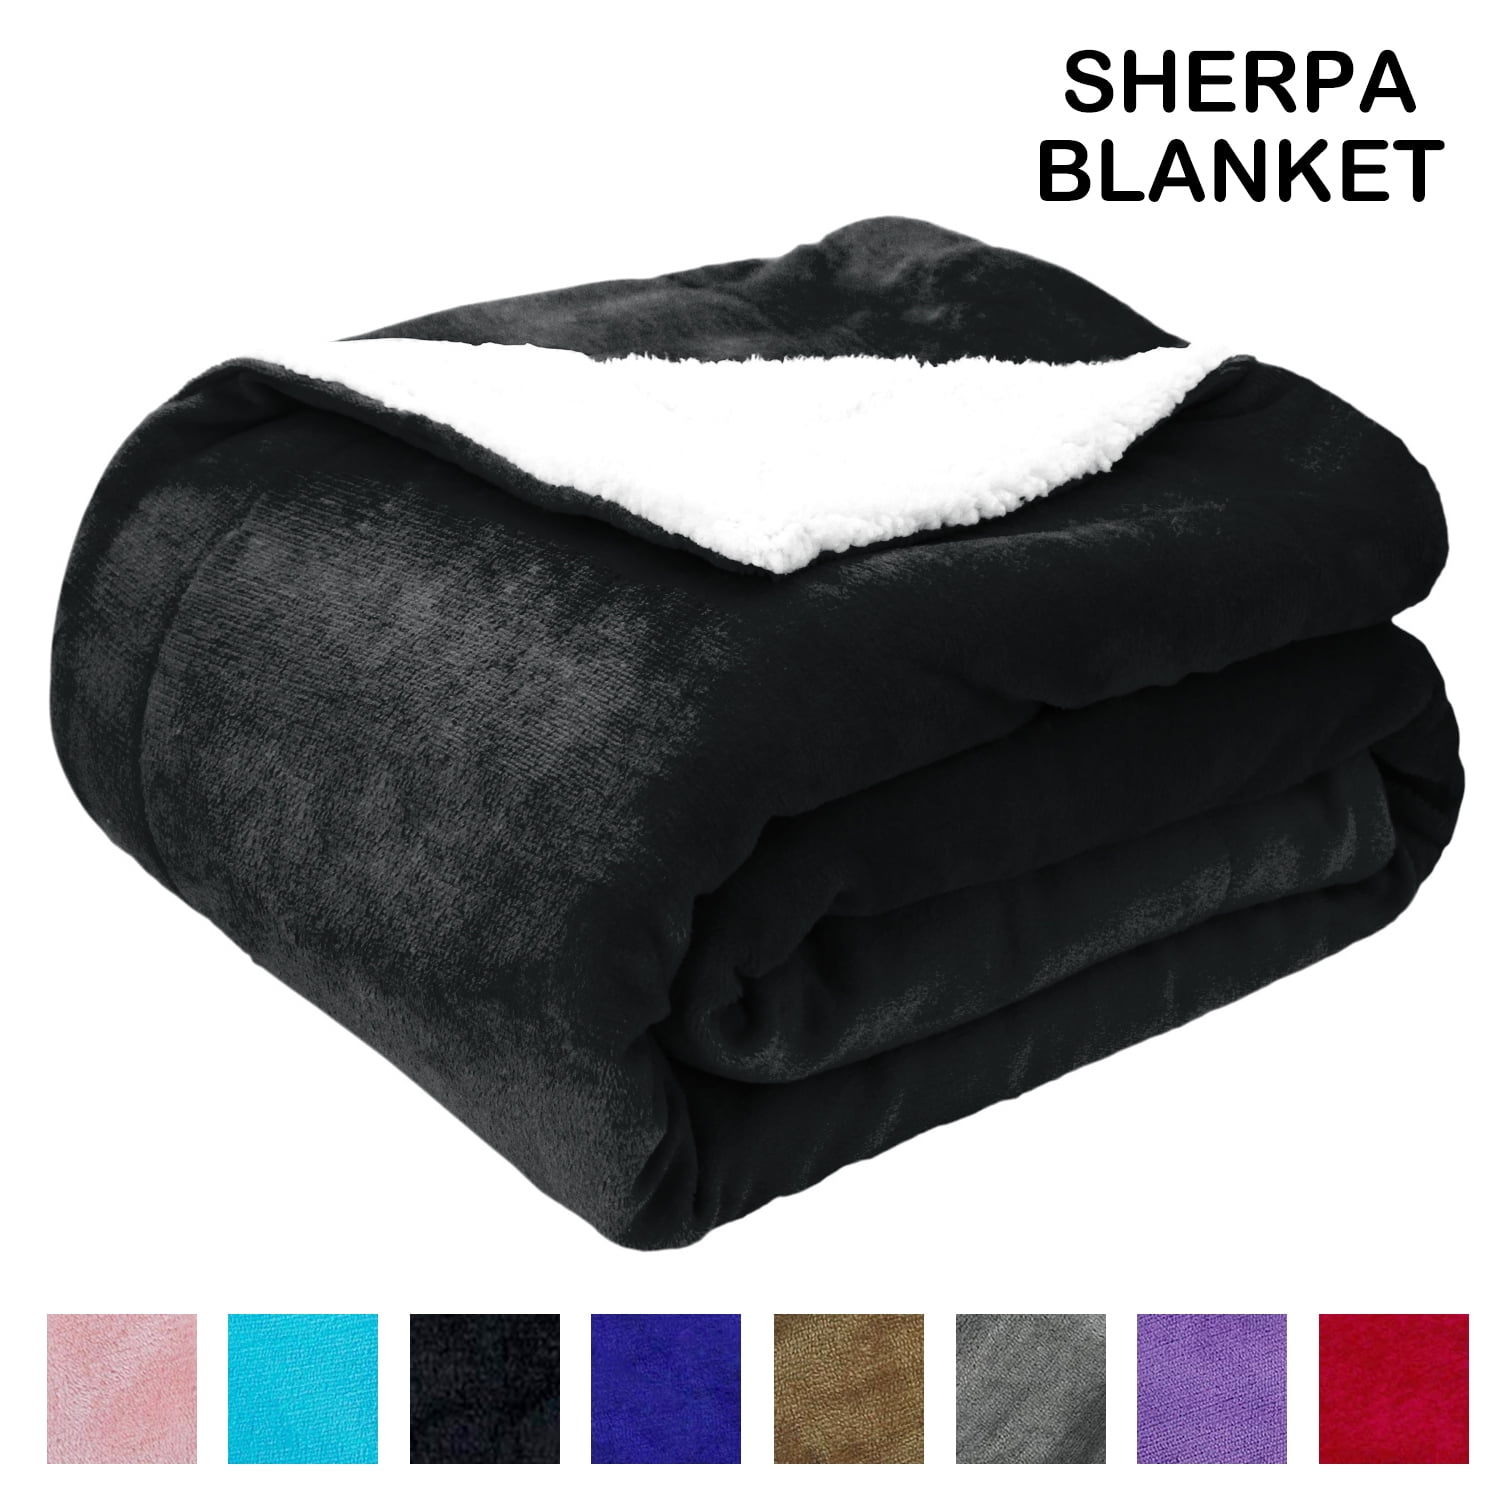 Sherpa Fleece Throw Blanket, Throw Size Soft Fuzzy Throw Blankets, Black  Warm Blanket, Cozy Fluffy Comfy for Sofa, Couch, Bed, Camping, Travel, 50  x 60 